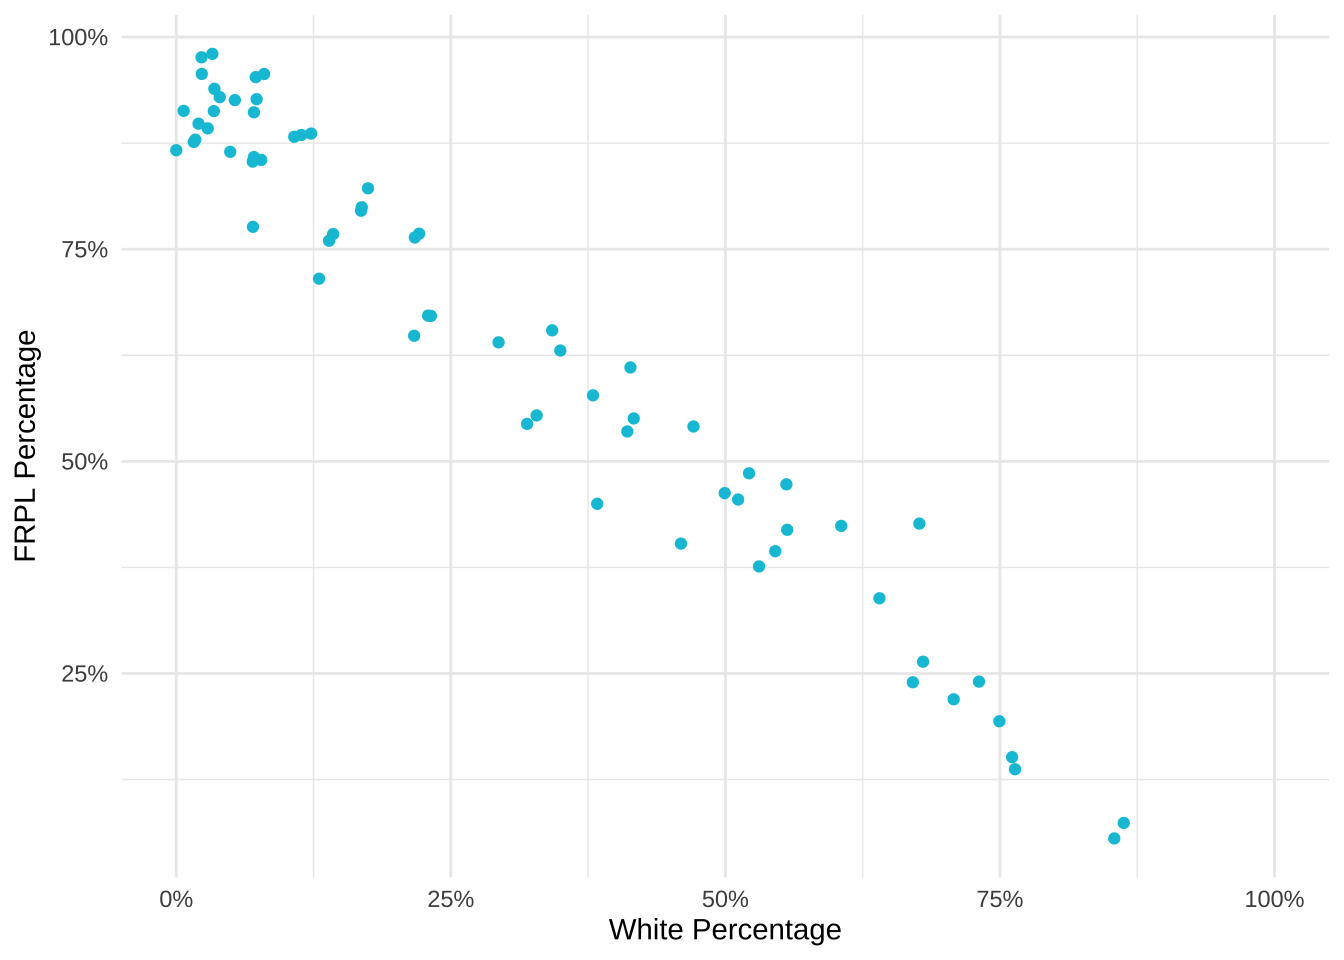 Scattershot showing the relationship of FRPL percentage and percentage of students that are White with a steep negative correlation.